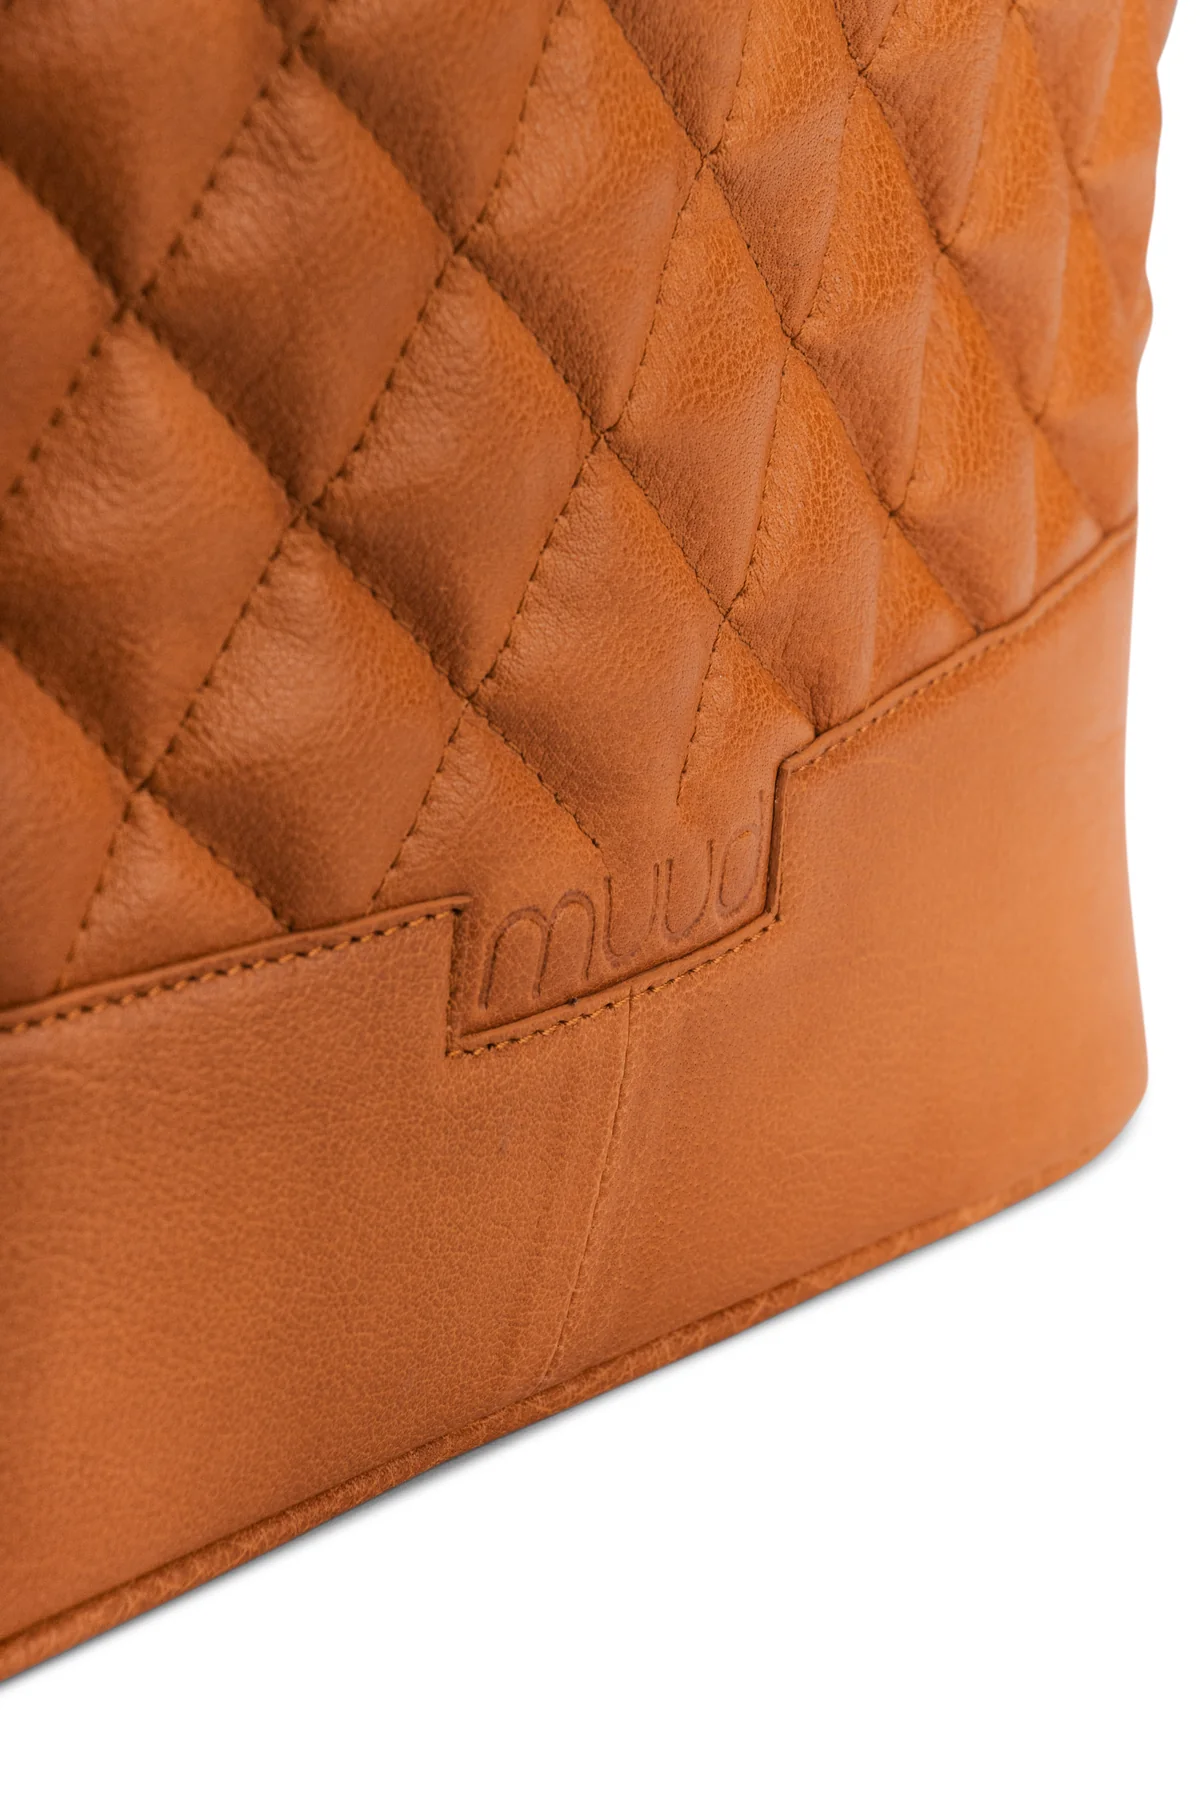 Muud_Betsy_Shopper_whisky_front_detail